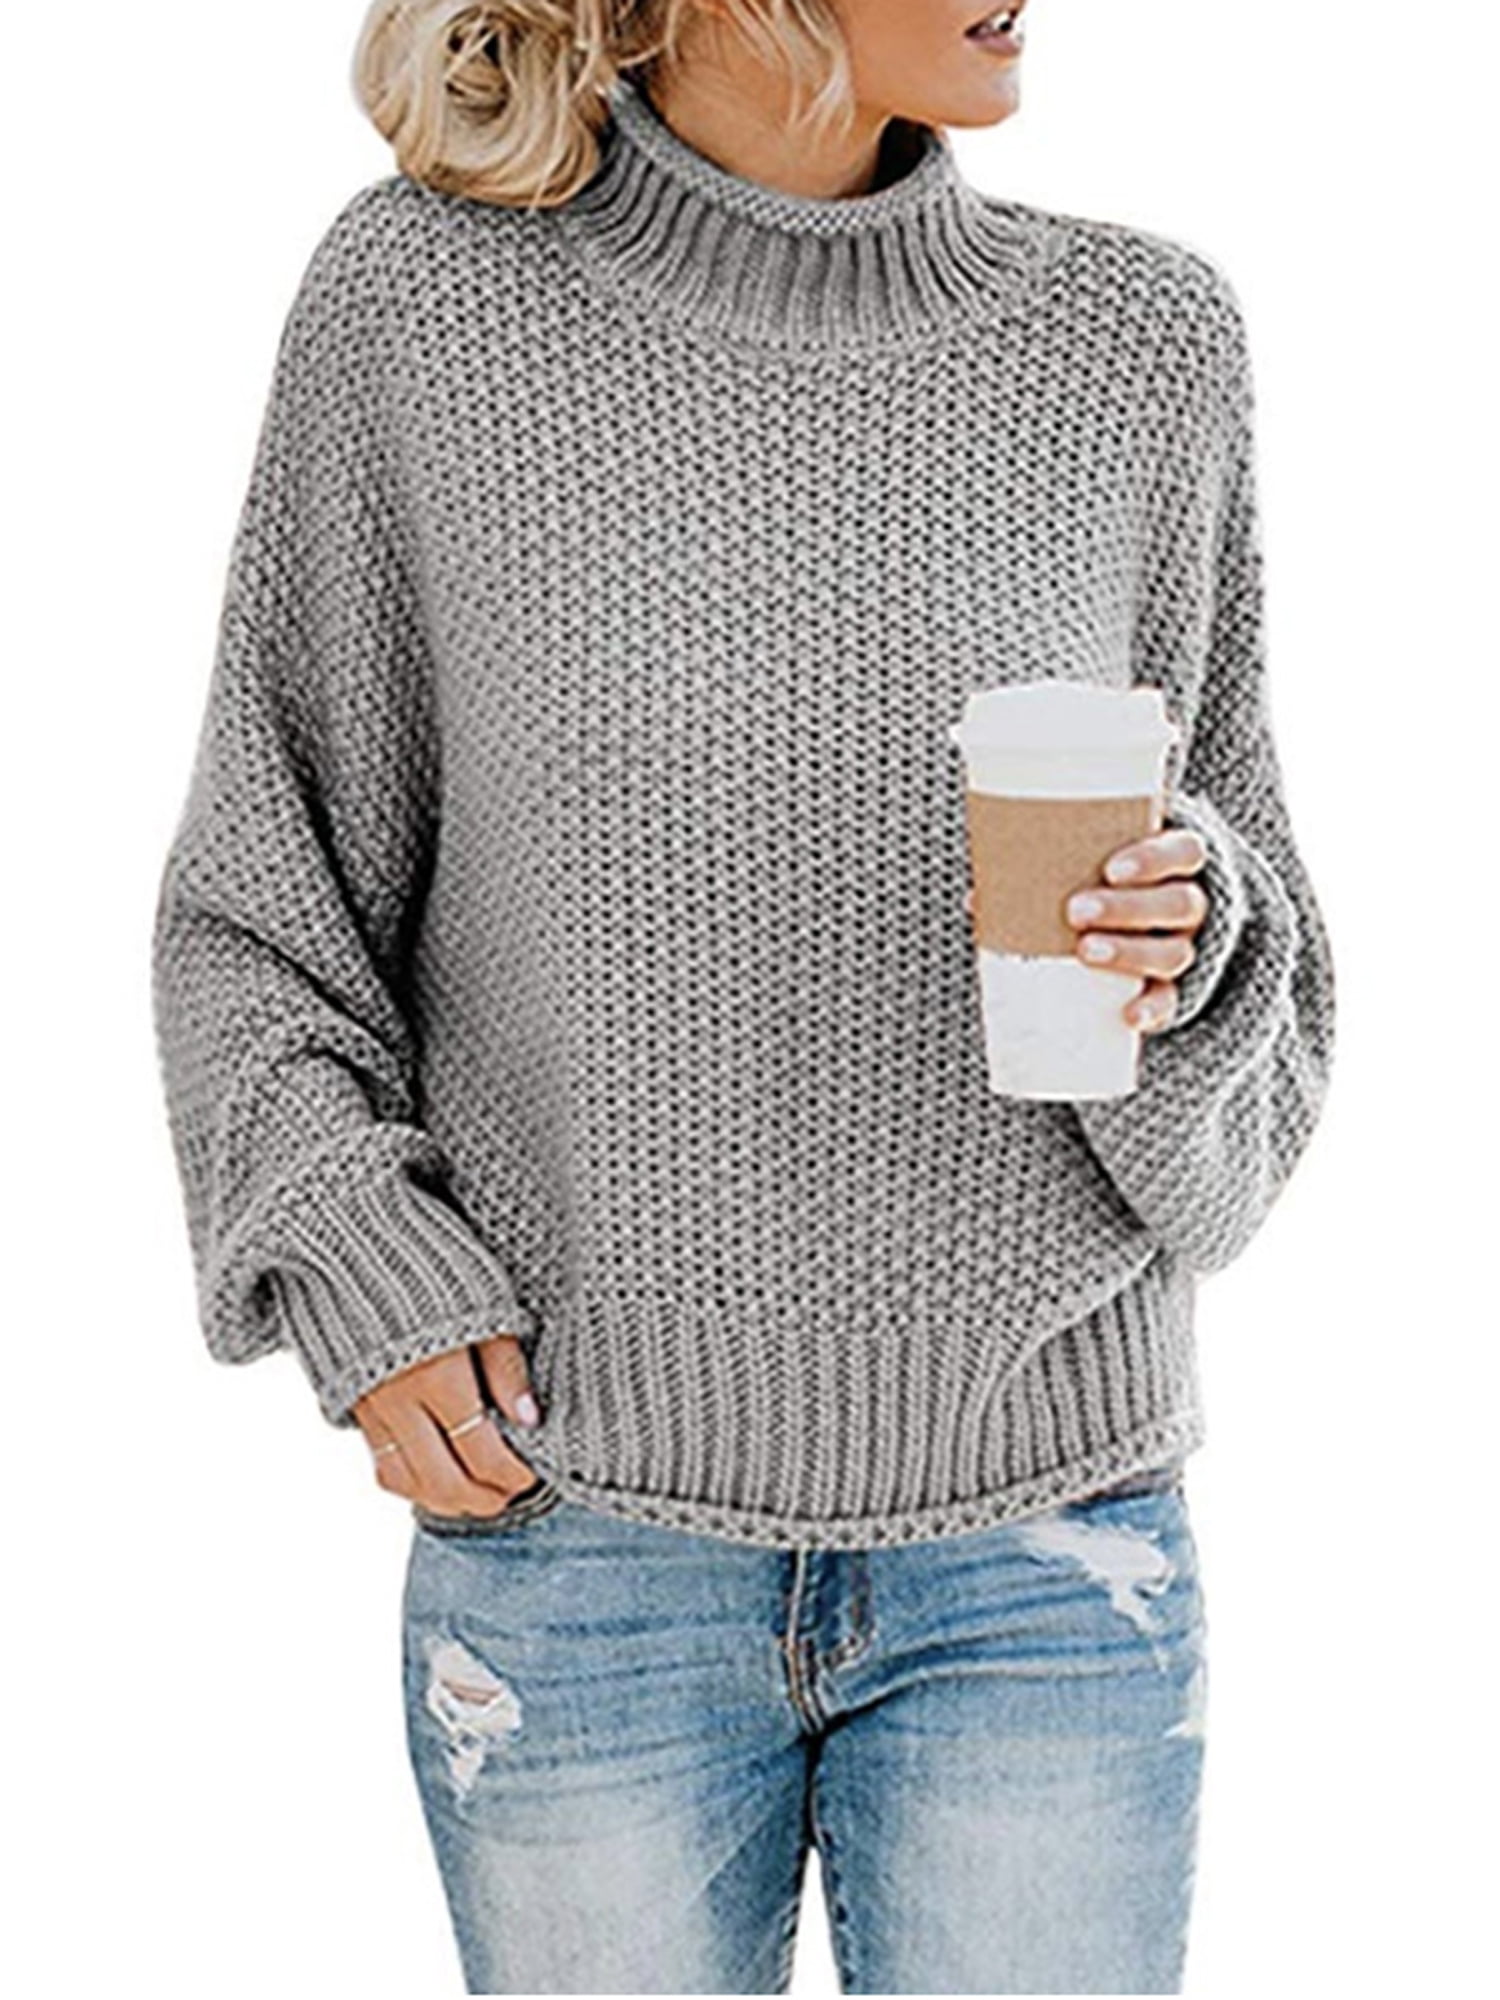 JULYCLO Womens Sweaters Turtleneck Long Sleeve Shirt Color Block Knit Pullover Sweater Tops with Pockets